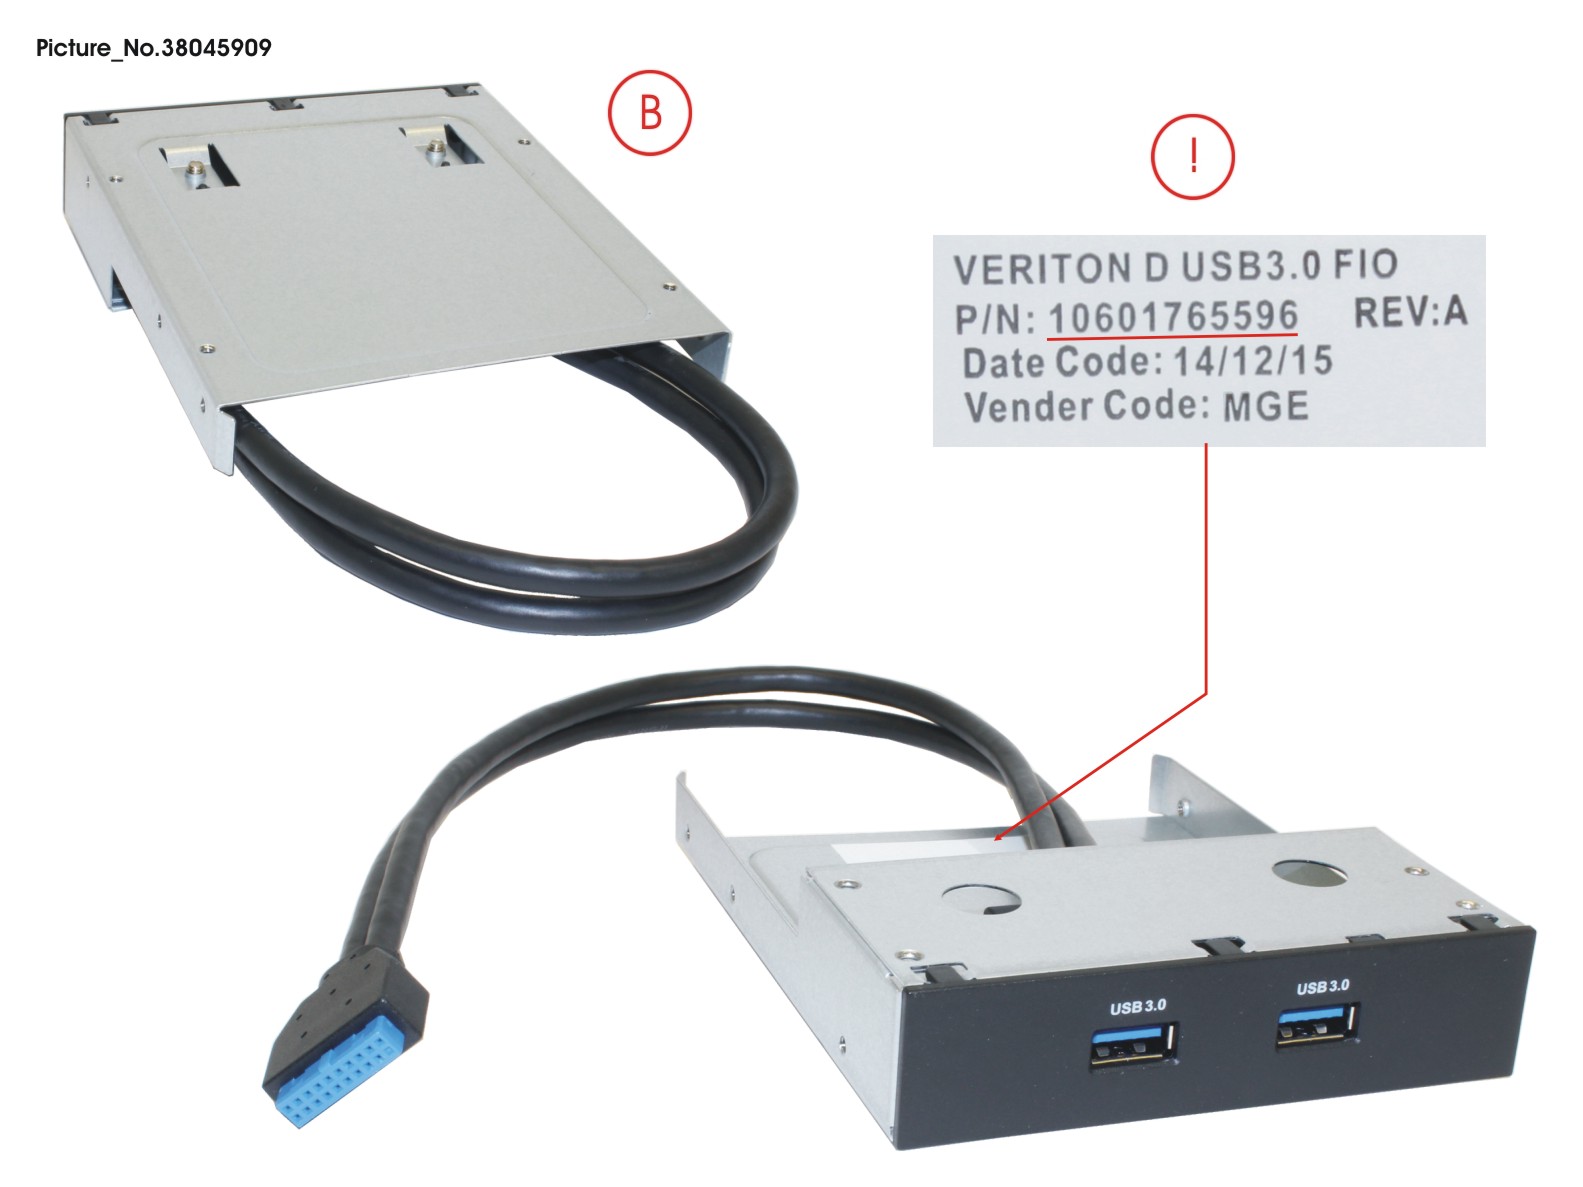 DUAL USB 3.0 FRONTCONNECTOR